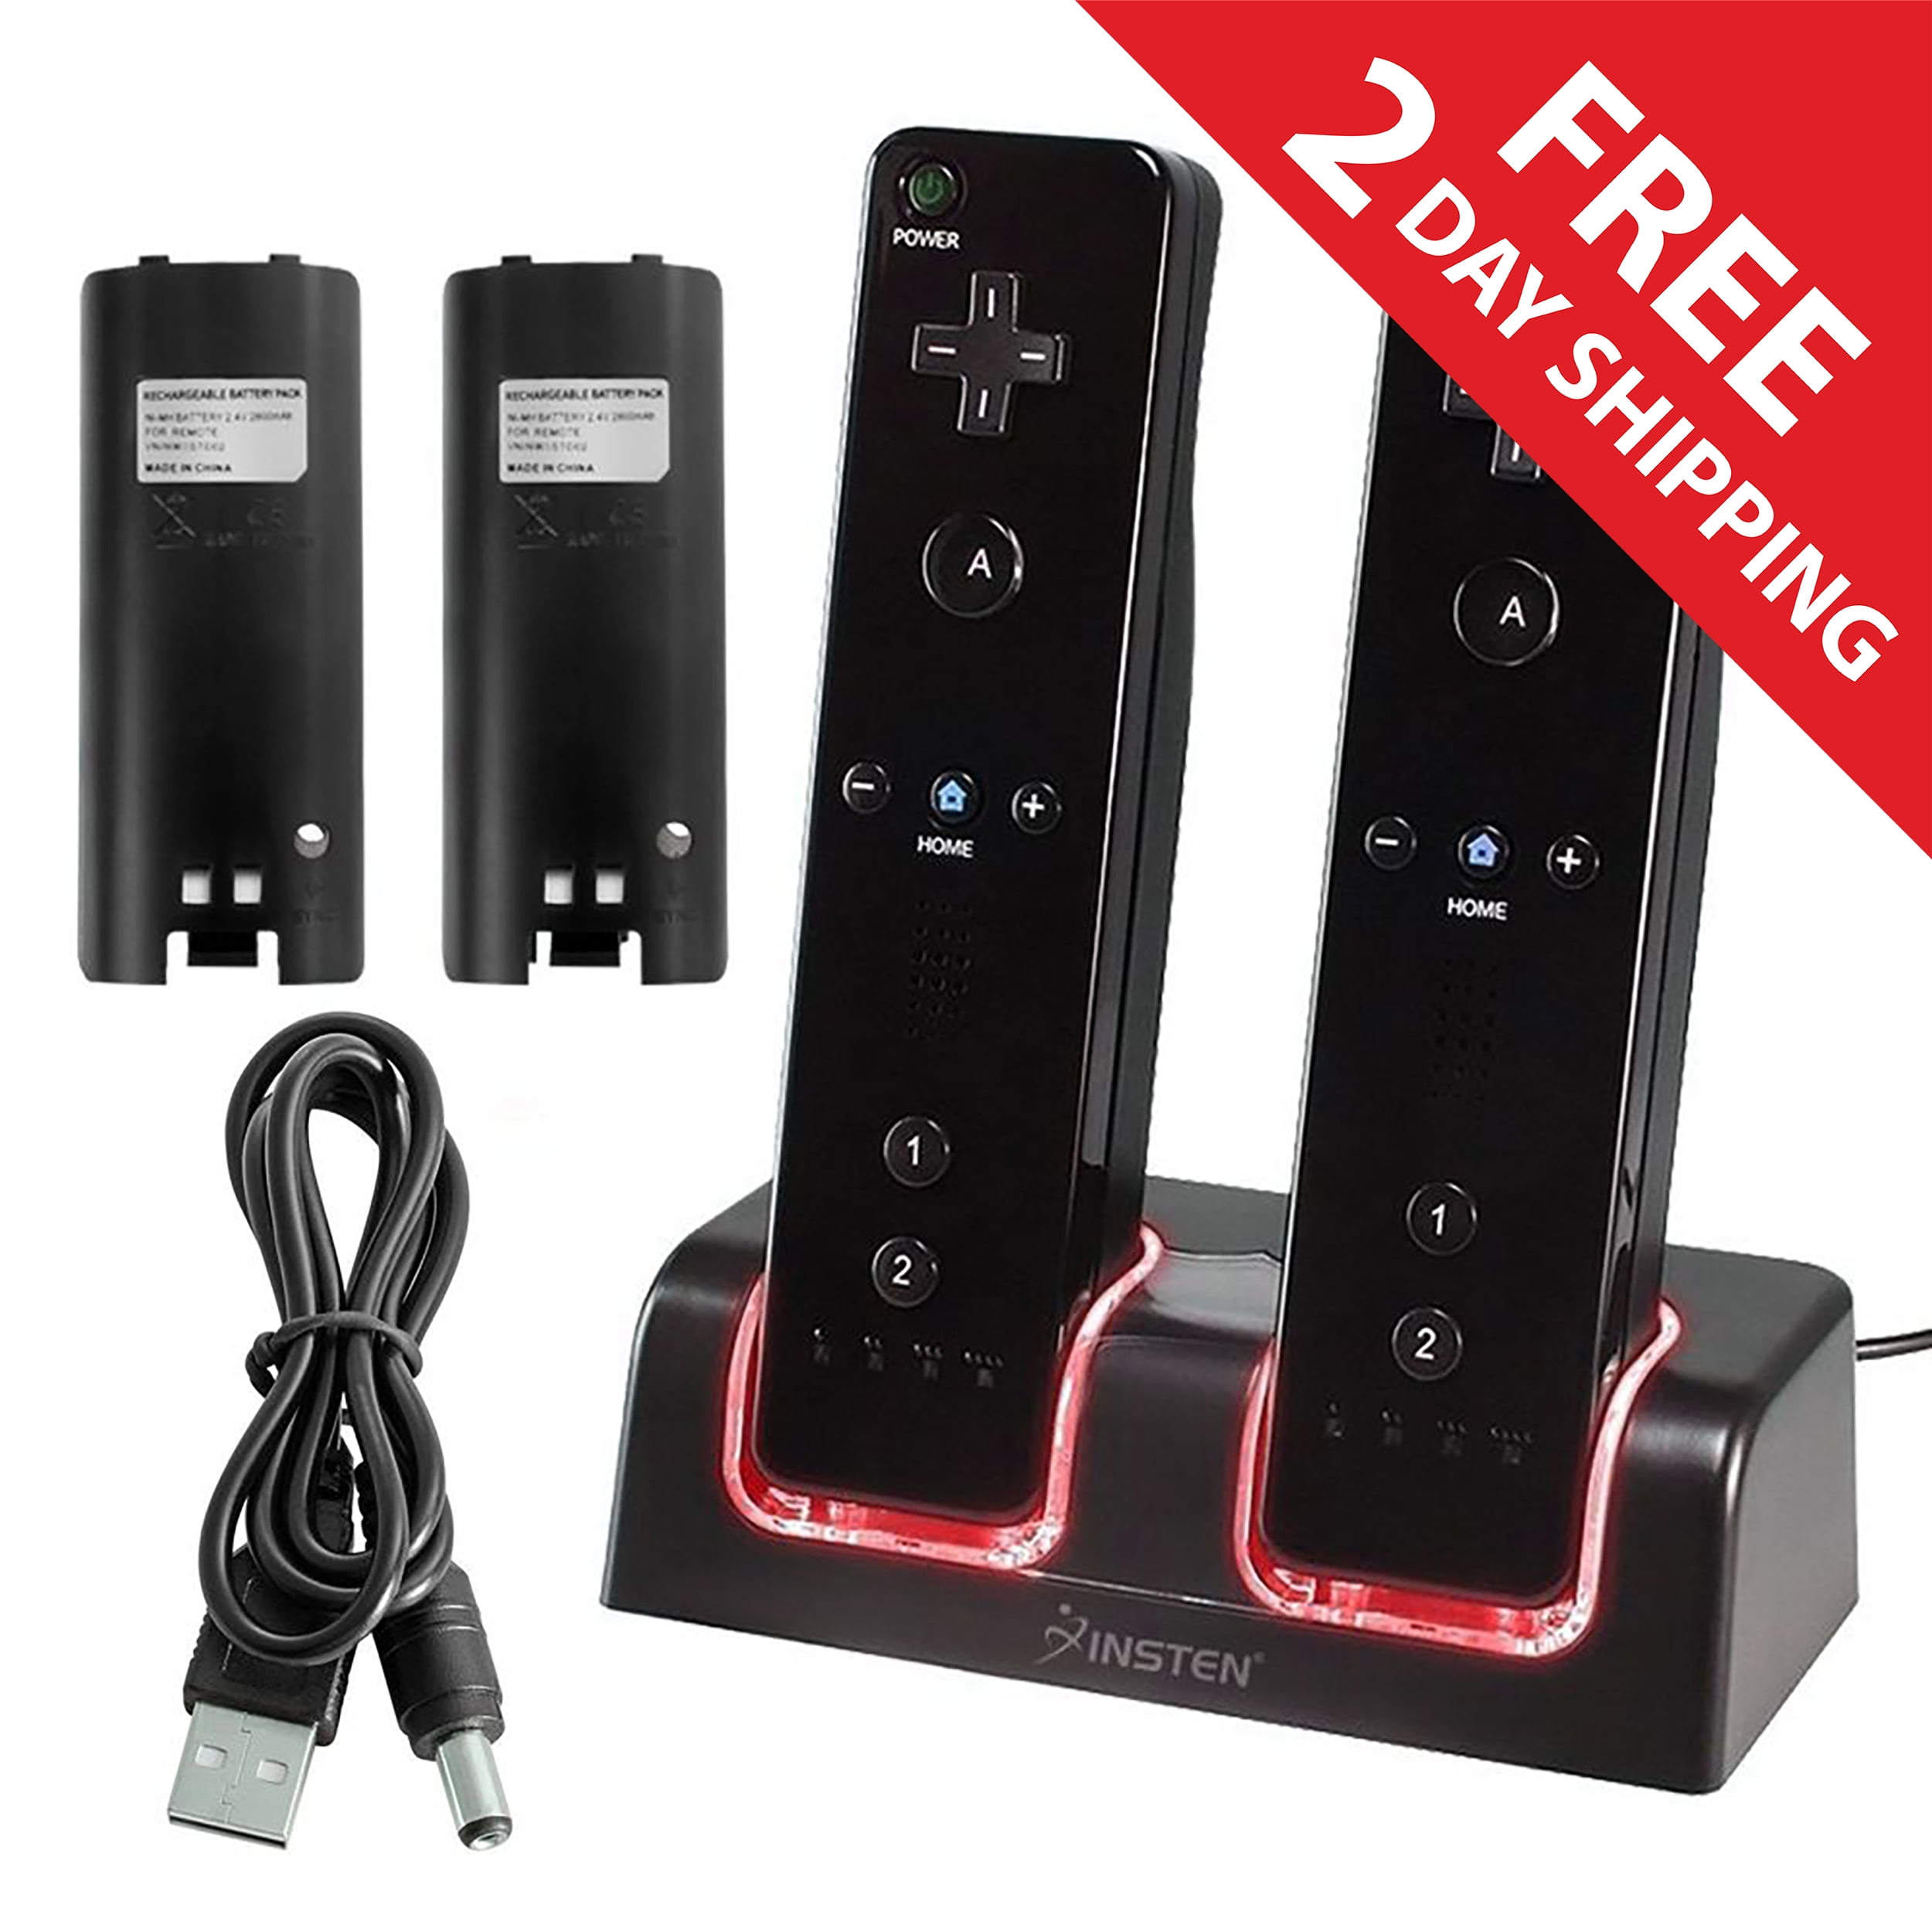 2pcs 2800mAh Rechargeable Battery Pack for Wii/Wii U Remote Game Conroller Controller Charger Kit with USB Cable and Batteries Dual Charging Station Dock 